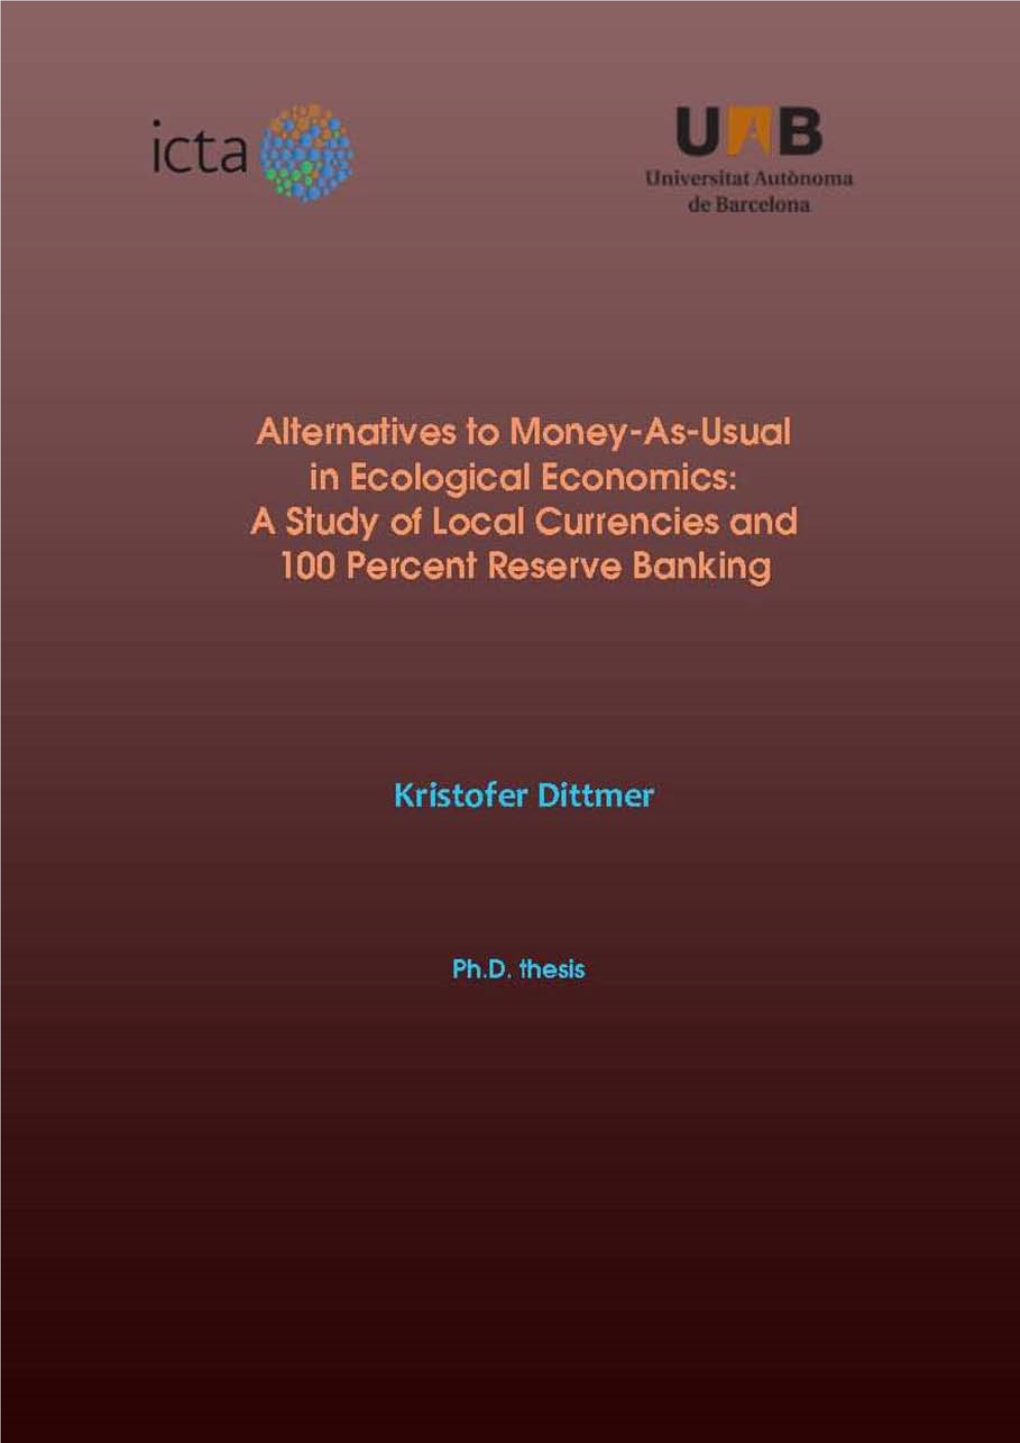 Alternatives to Money-As-Usual in Ecological Economics: a Study of Local Currencies and 100 Percent Reserve Banking